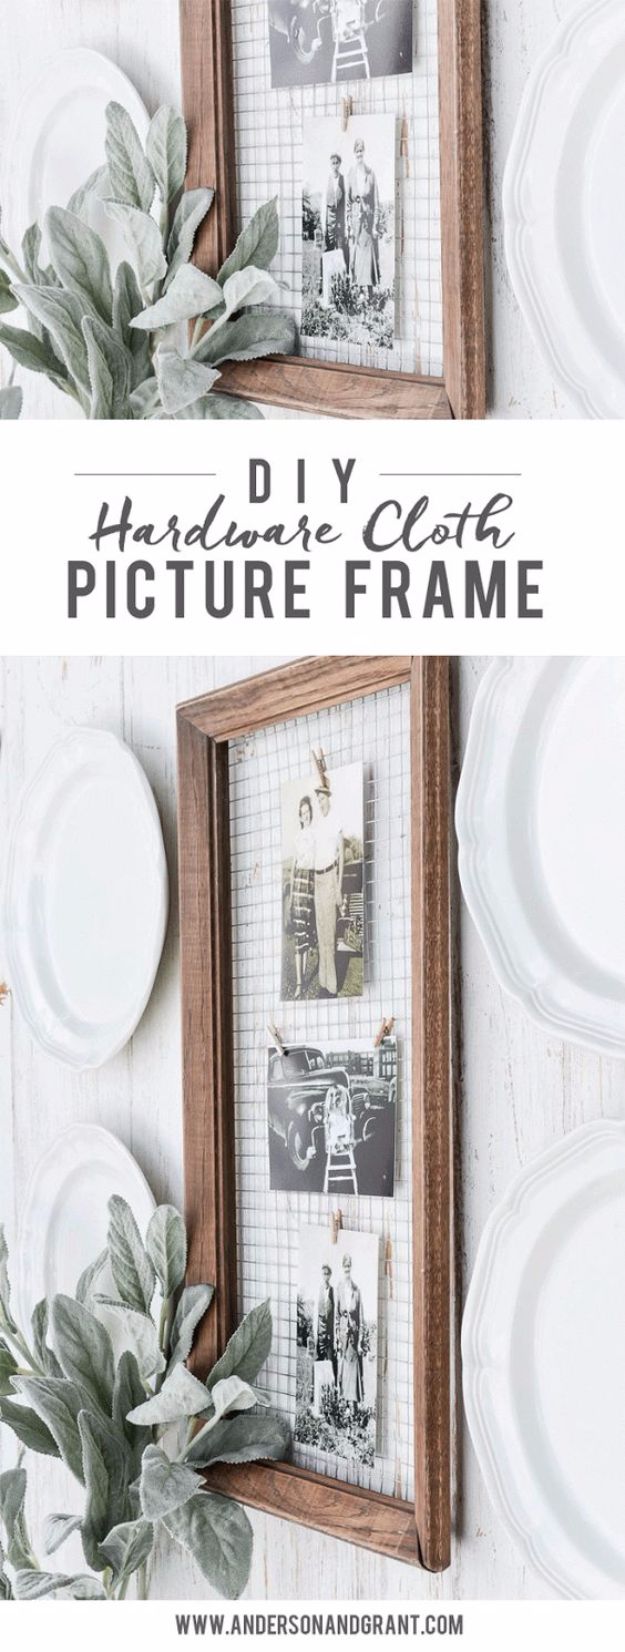 DIY Ideas With Old Picture Frames - DIY Hardware Cloth Picture Frame - Cool Crafts To Make With A Repurposed Picture Frame - Cheap Do It Yourself Gifts and Home Decor on A Budget - Fun Ideas for Decorating Your House and Room 